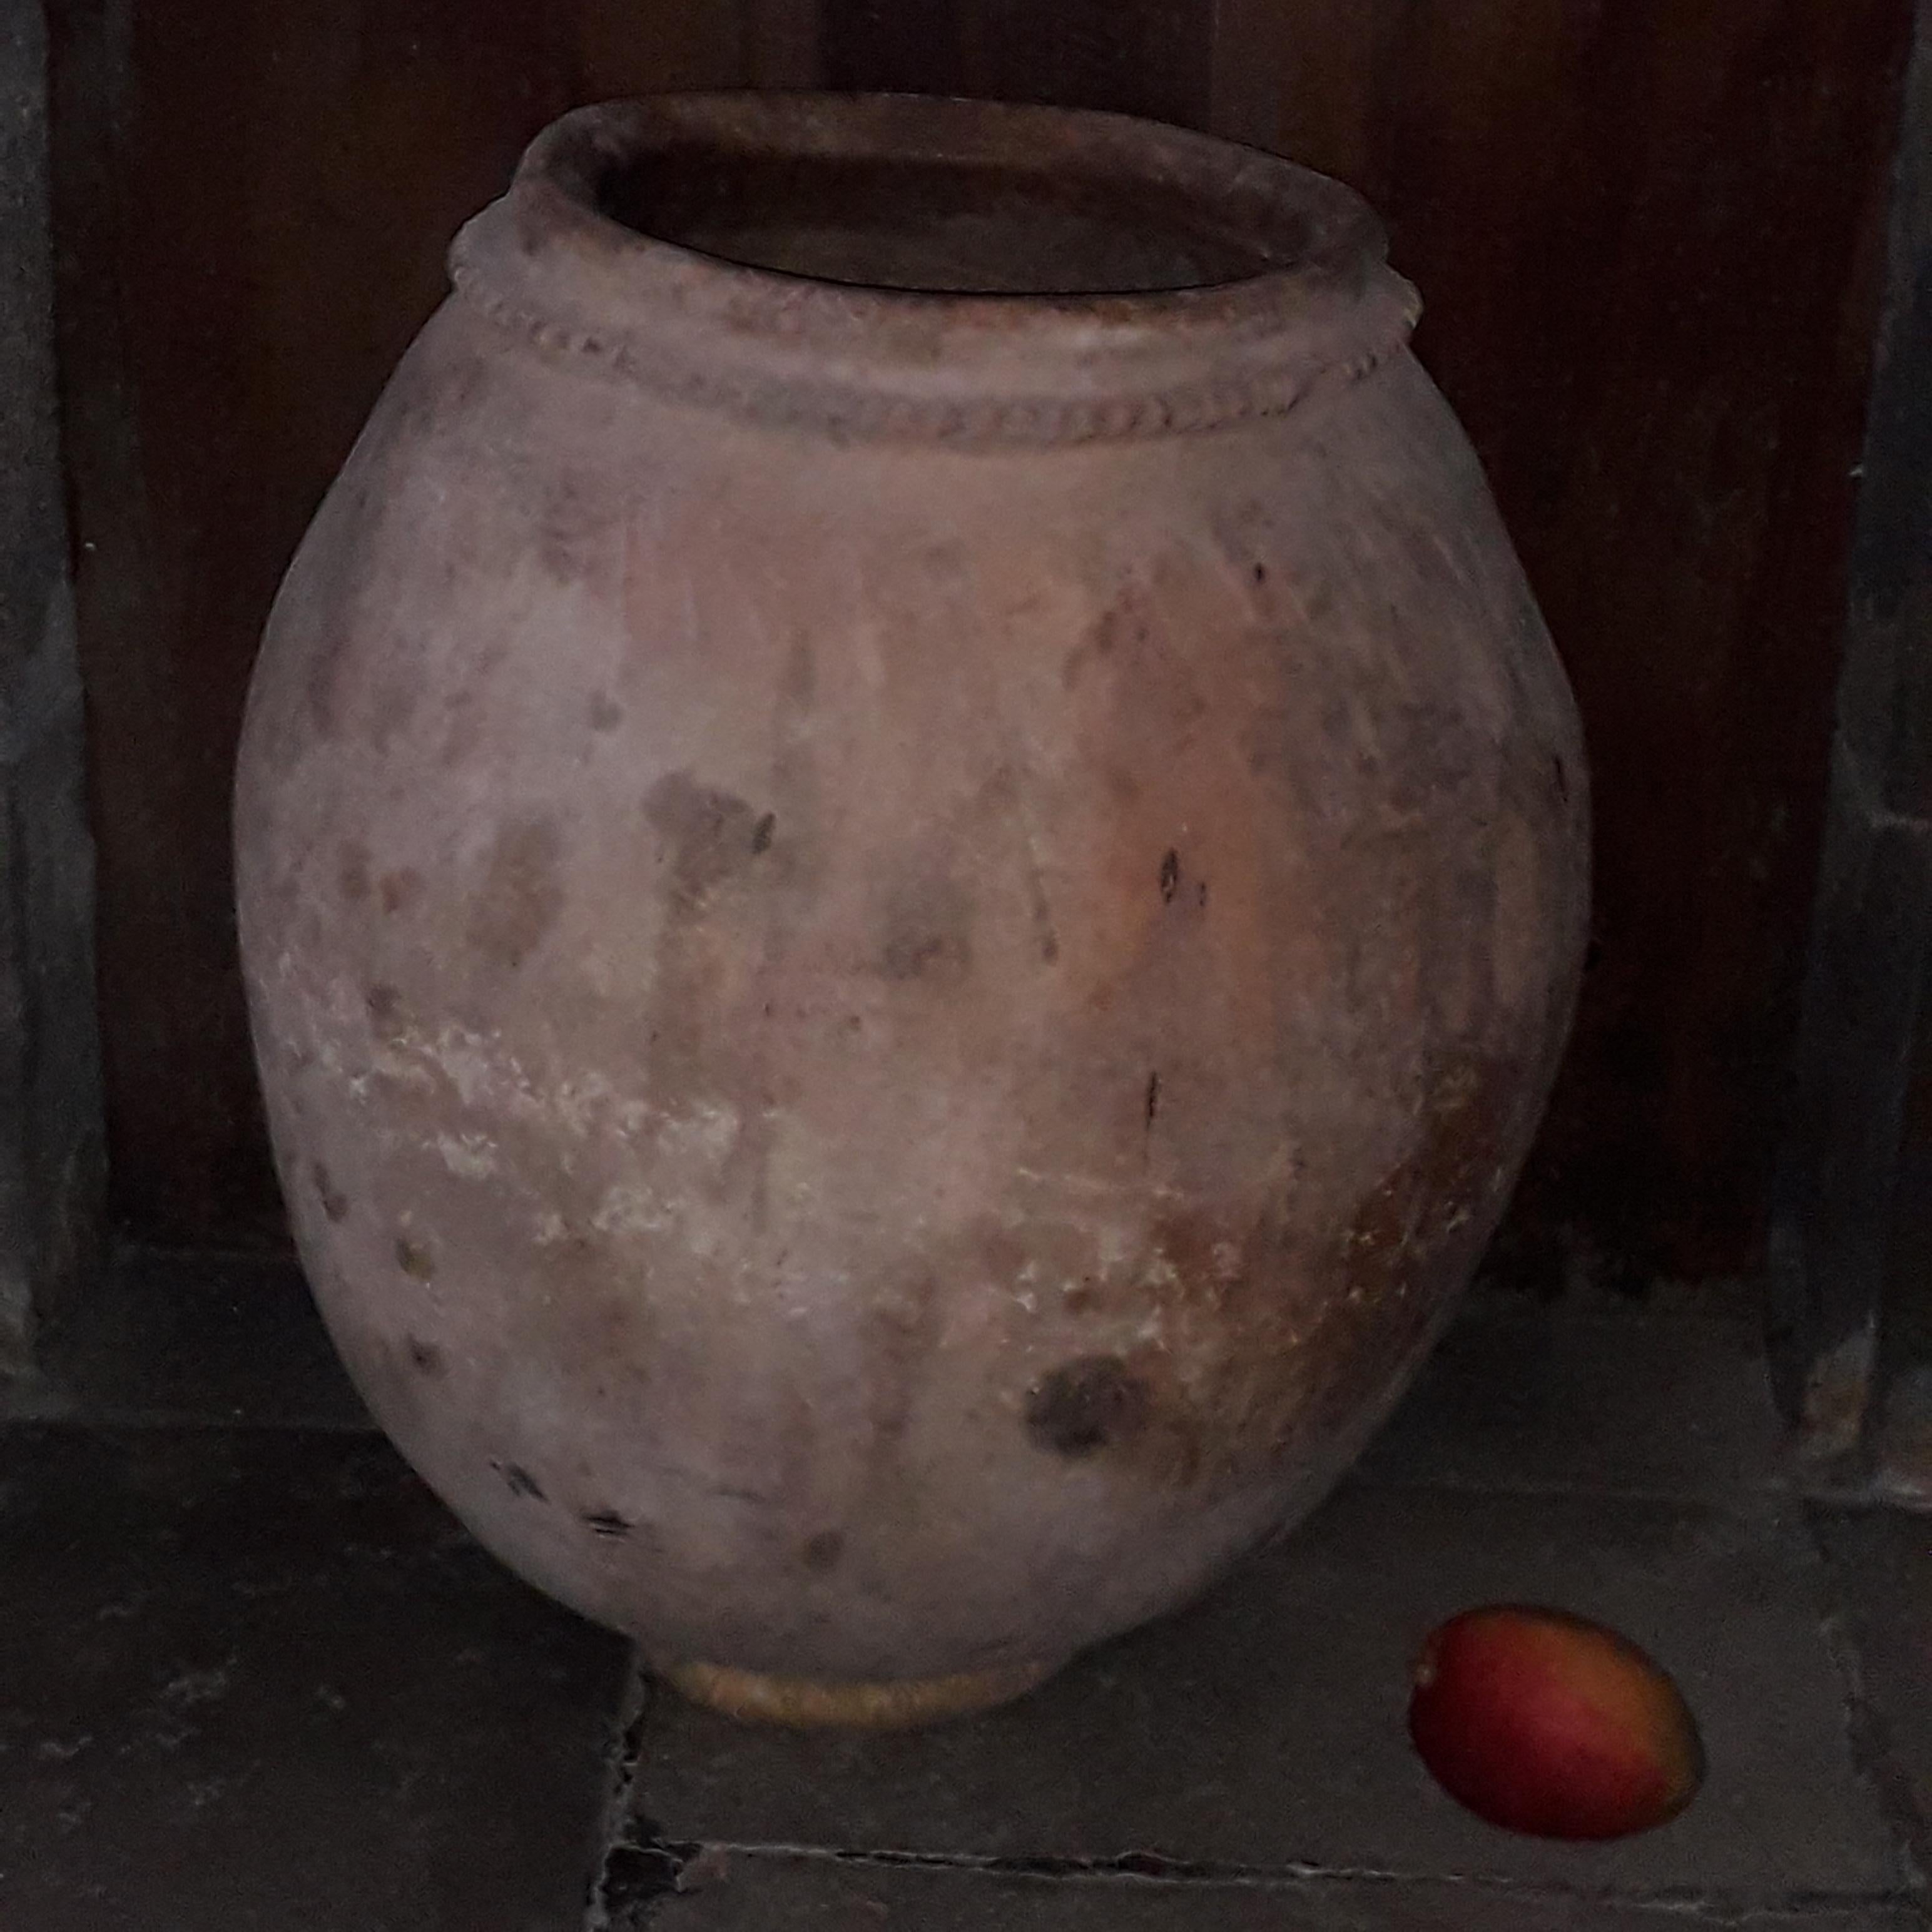 Large jar with Moroccan water, collected in situ homestay. Provenance: ksar in southern Morocco, Ait Ben Haddou.
Object in its juice with a beautiful patina of origin, handmade, few losses of use.
Measures: Height 66 cm, diameter 55 cm.